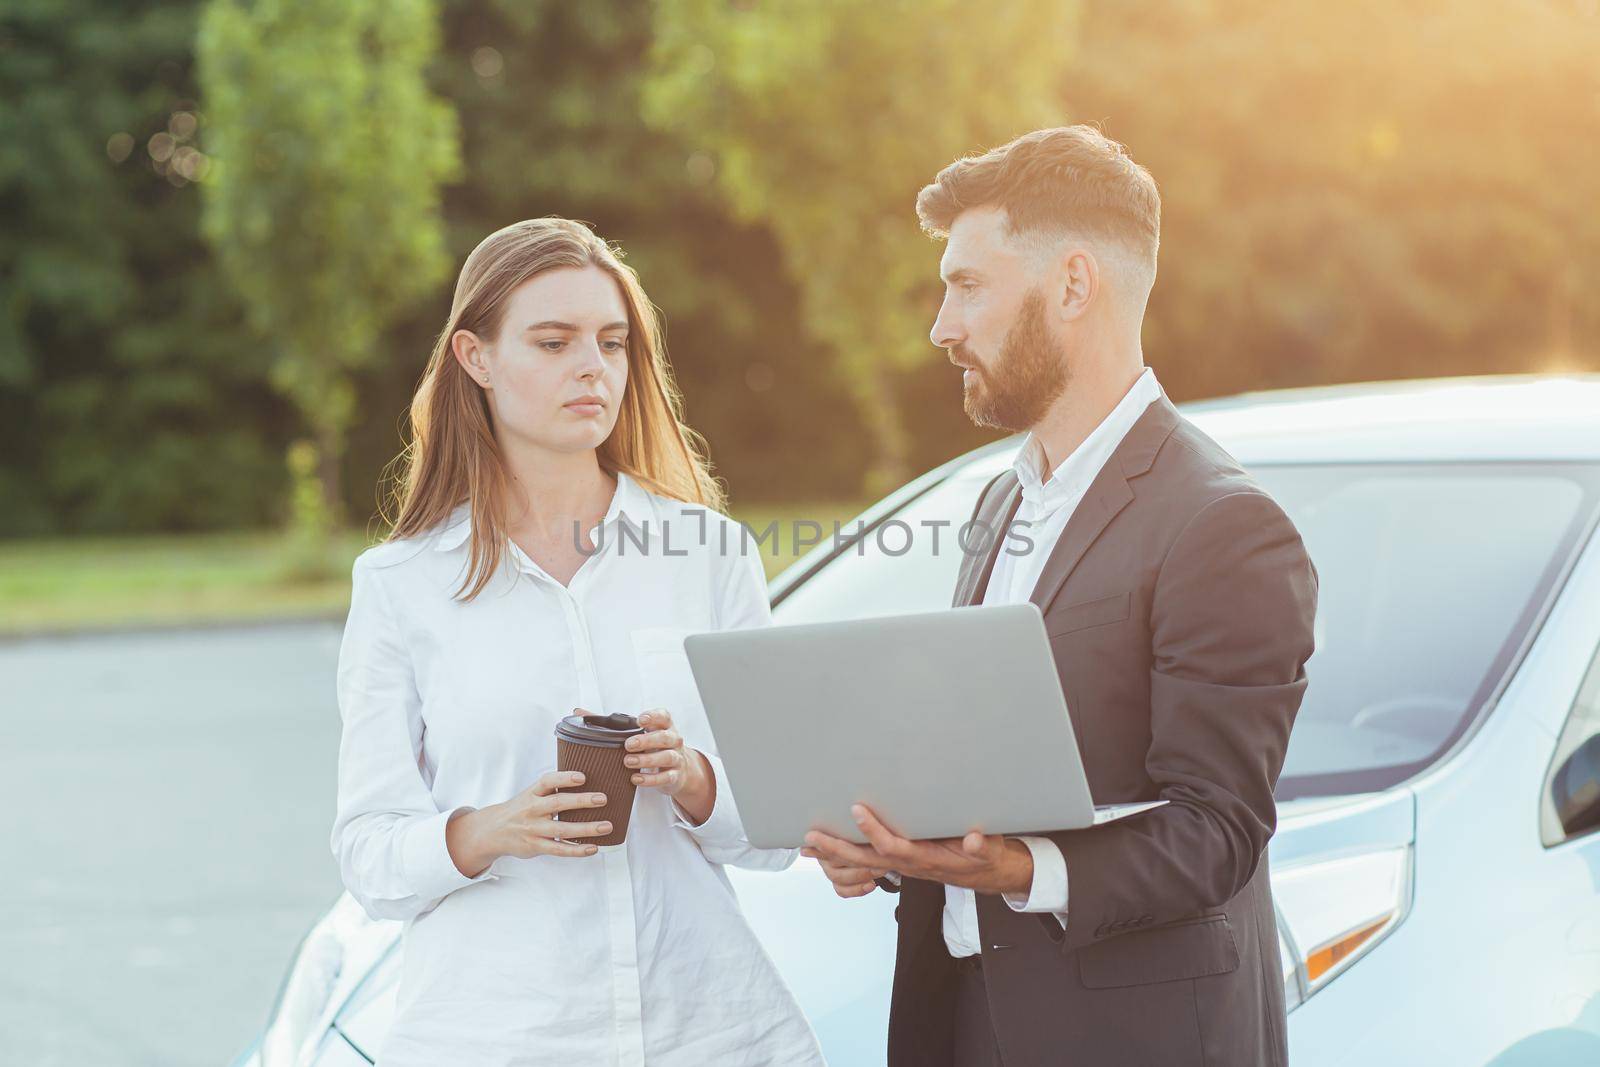 Male car salesman, recommends a car to a woman buyer, inspects cars in the showroom, the seller uses a laptop to view technical information on the car